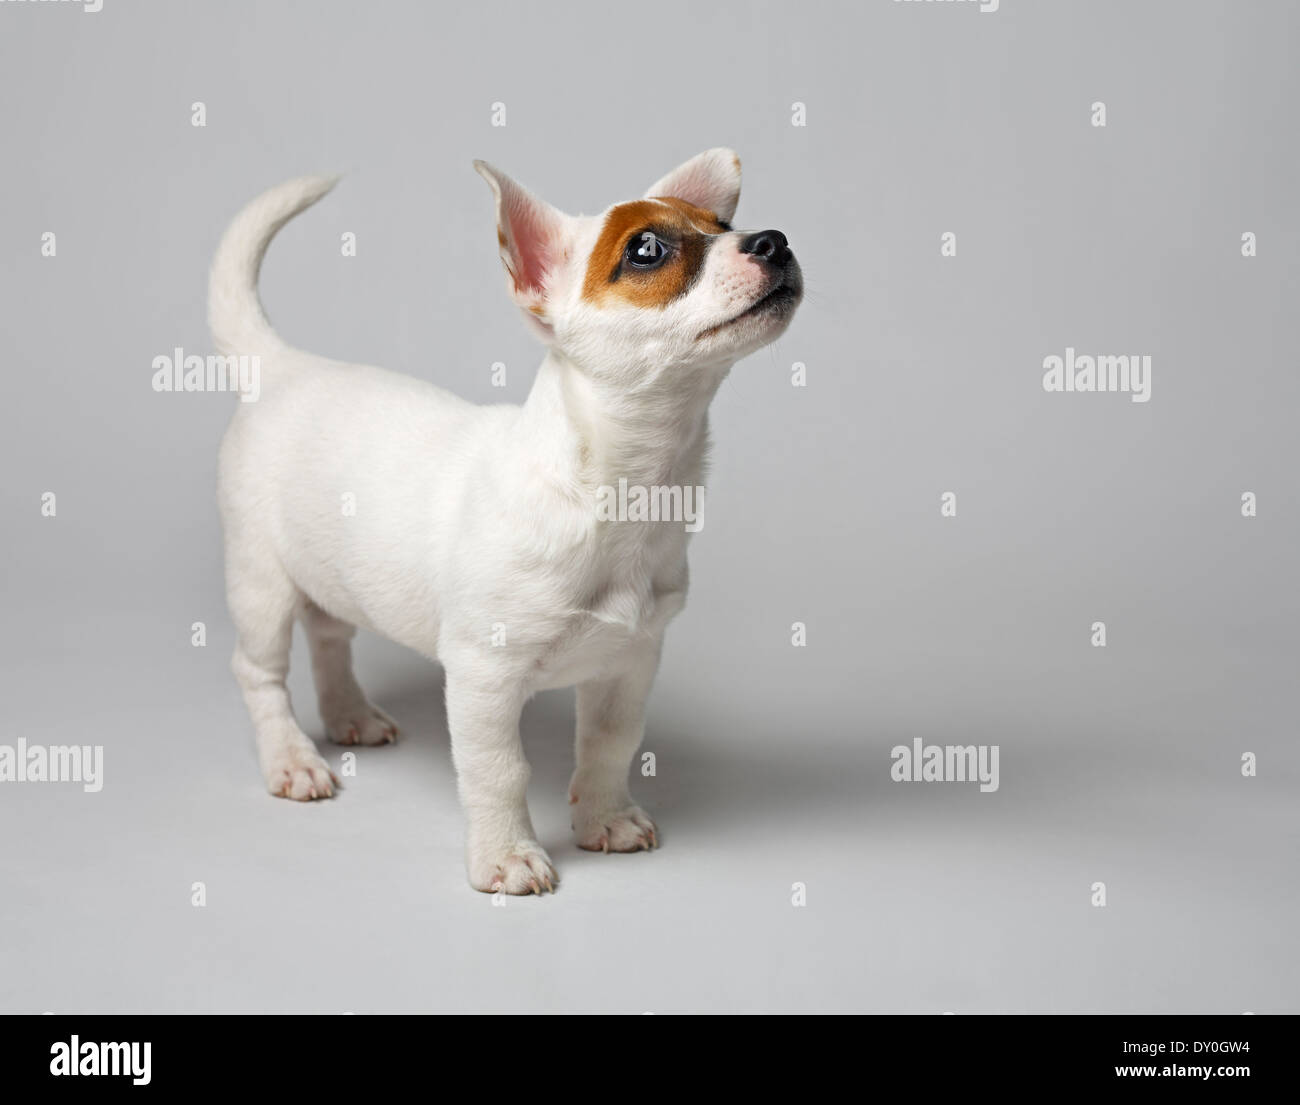 Jack Russell terrier puppy. Very short depth-of-field. Stock Photo